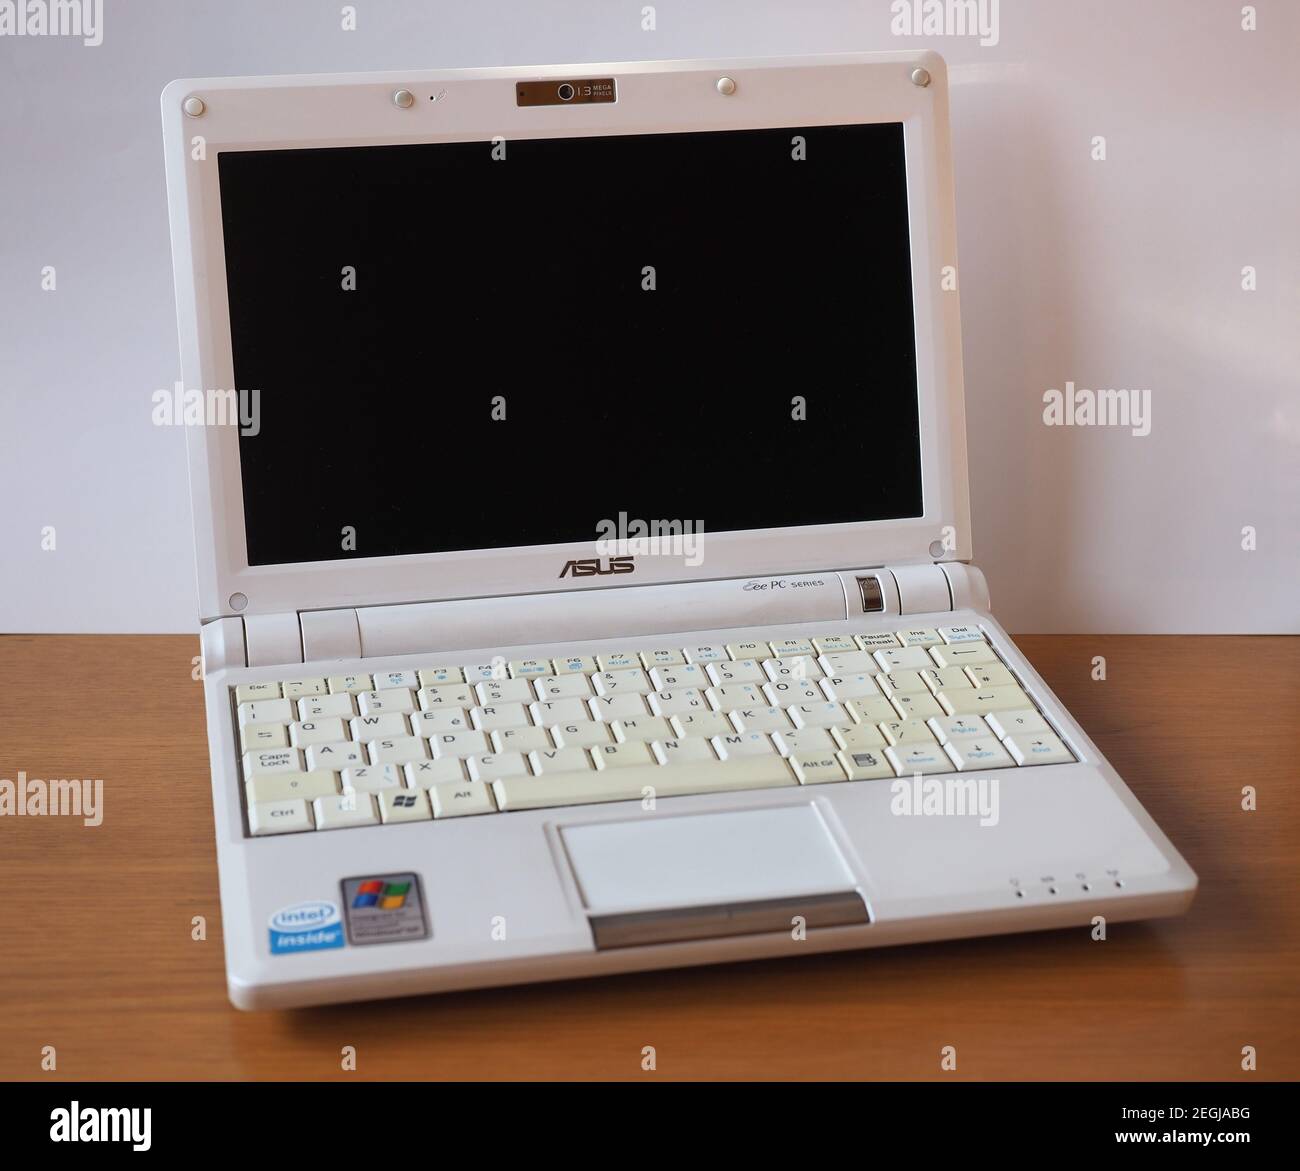 TAIPEI, CHINE - VERS FÉVRIER 2021: ASUS EEE PC 900 bloc-notes Photo Stock -  Alamy